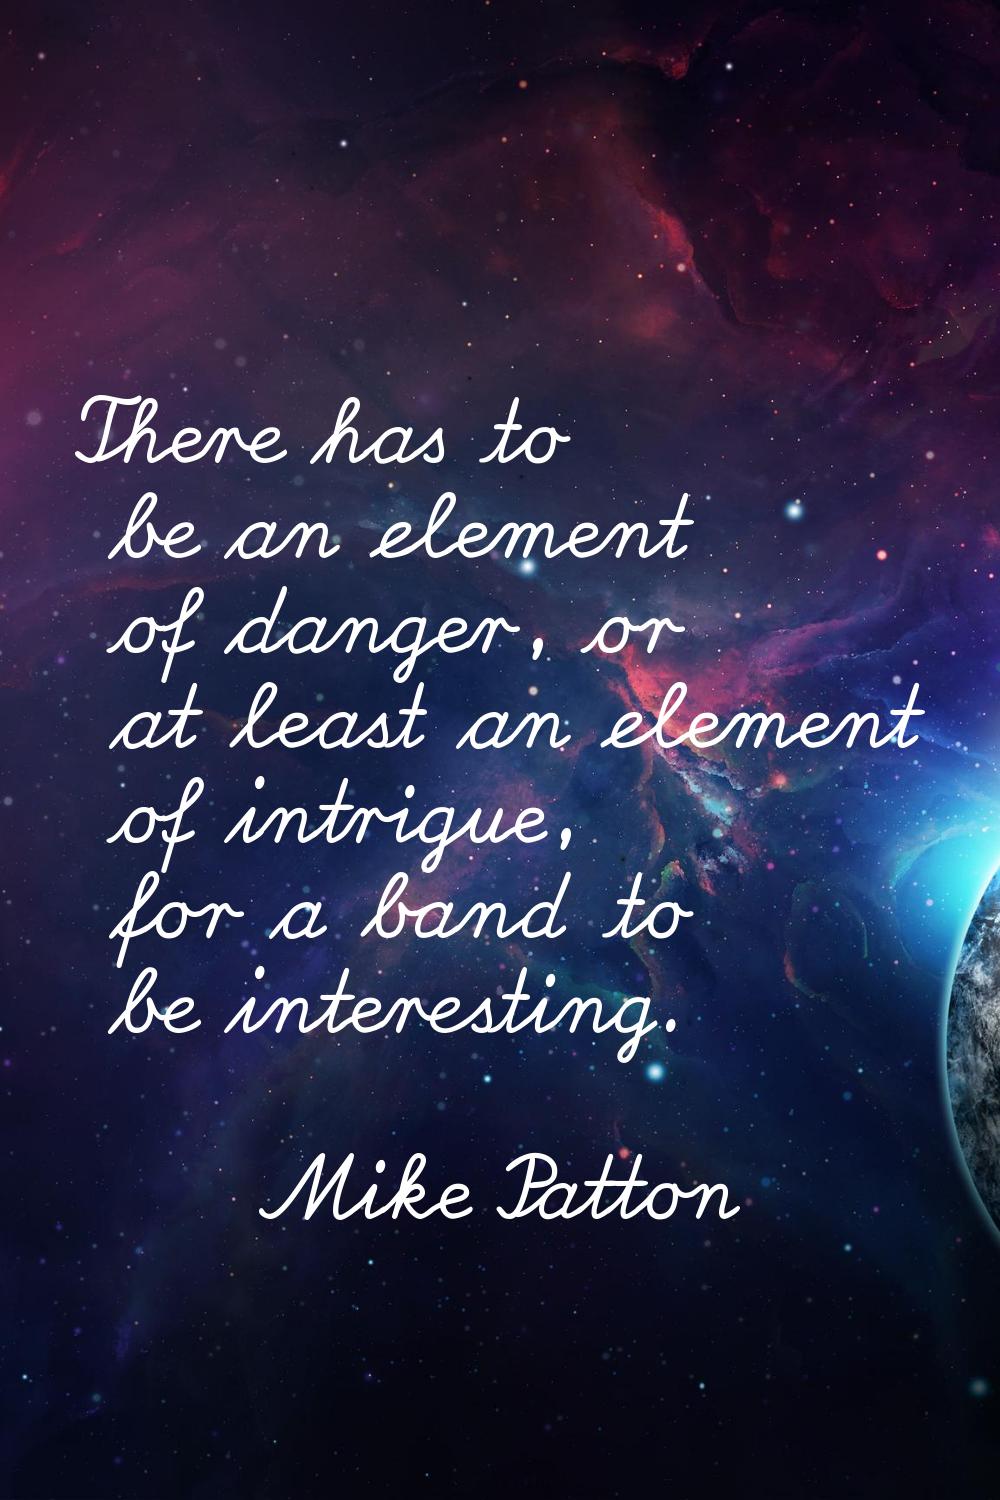 There has to be an element of danger, or at least an element of intrigue, for a band to be interest